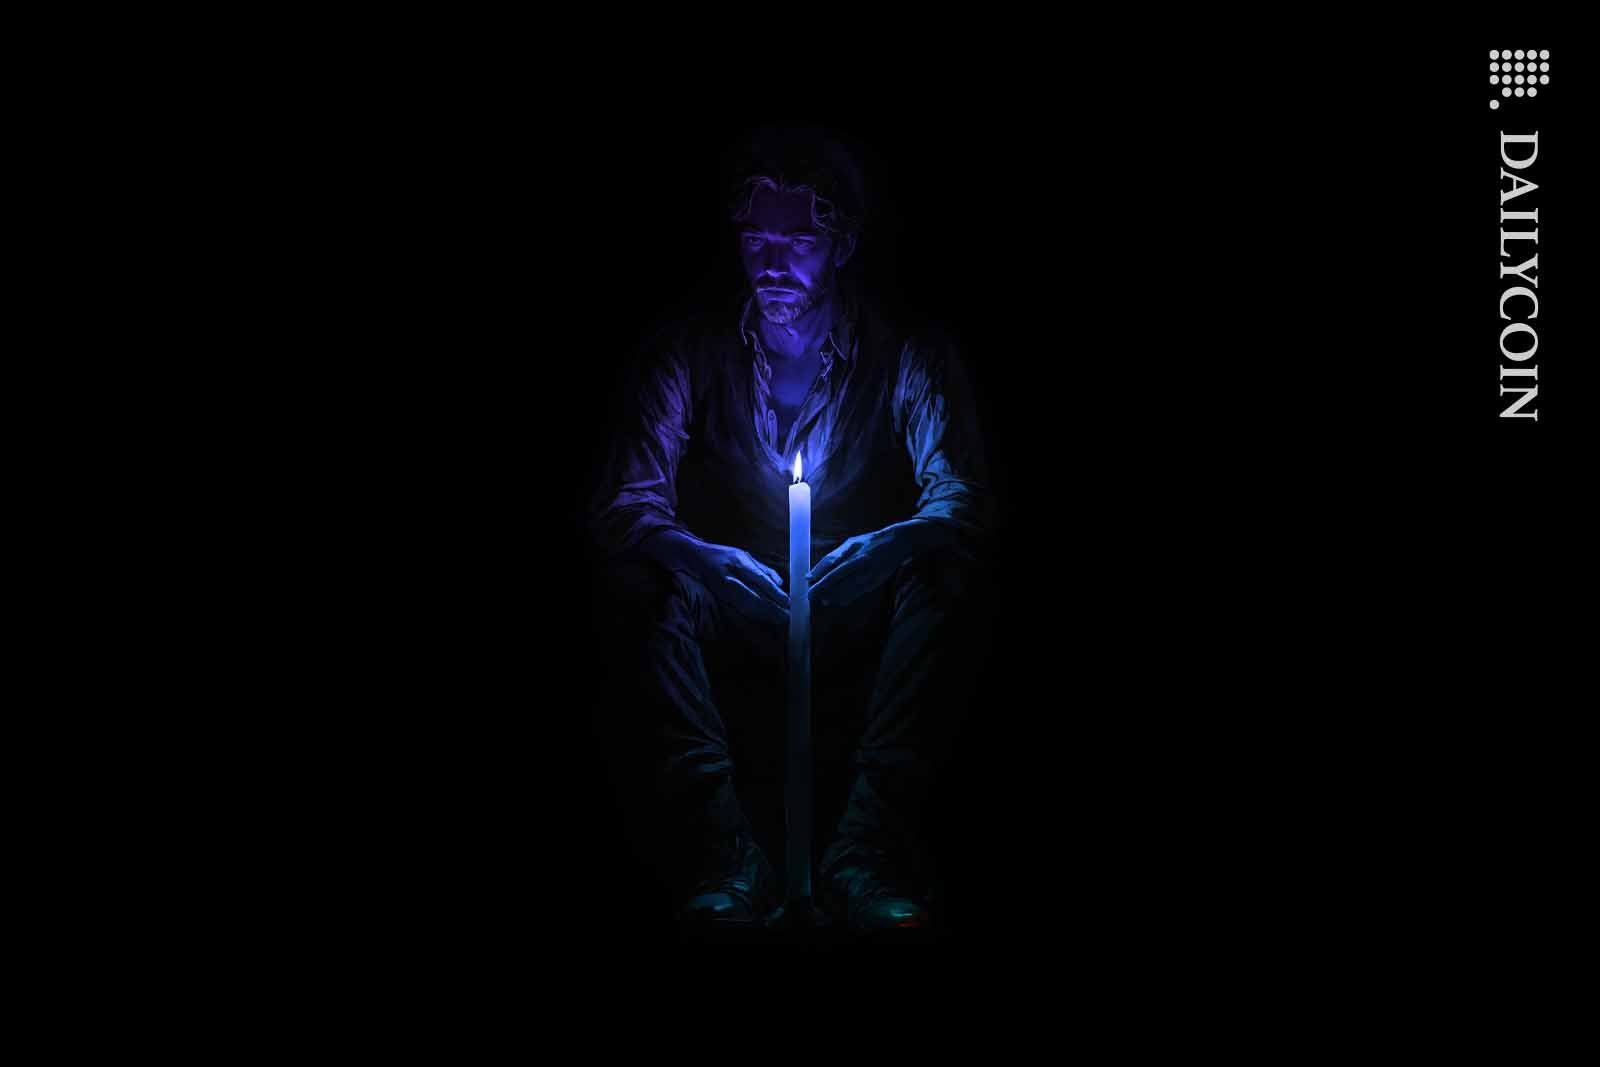 Man sitting in the dark next to a purple candle.